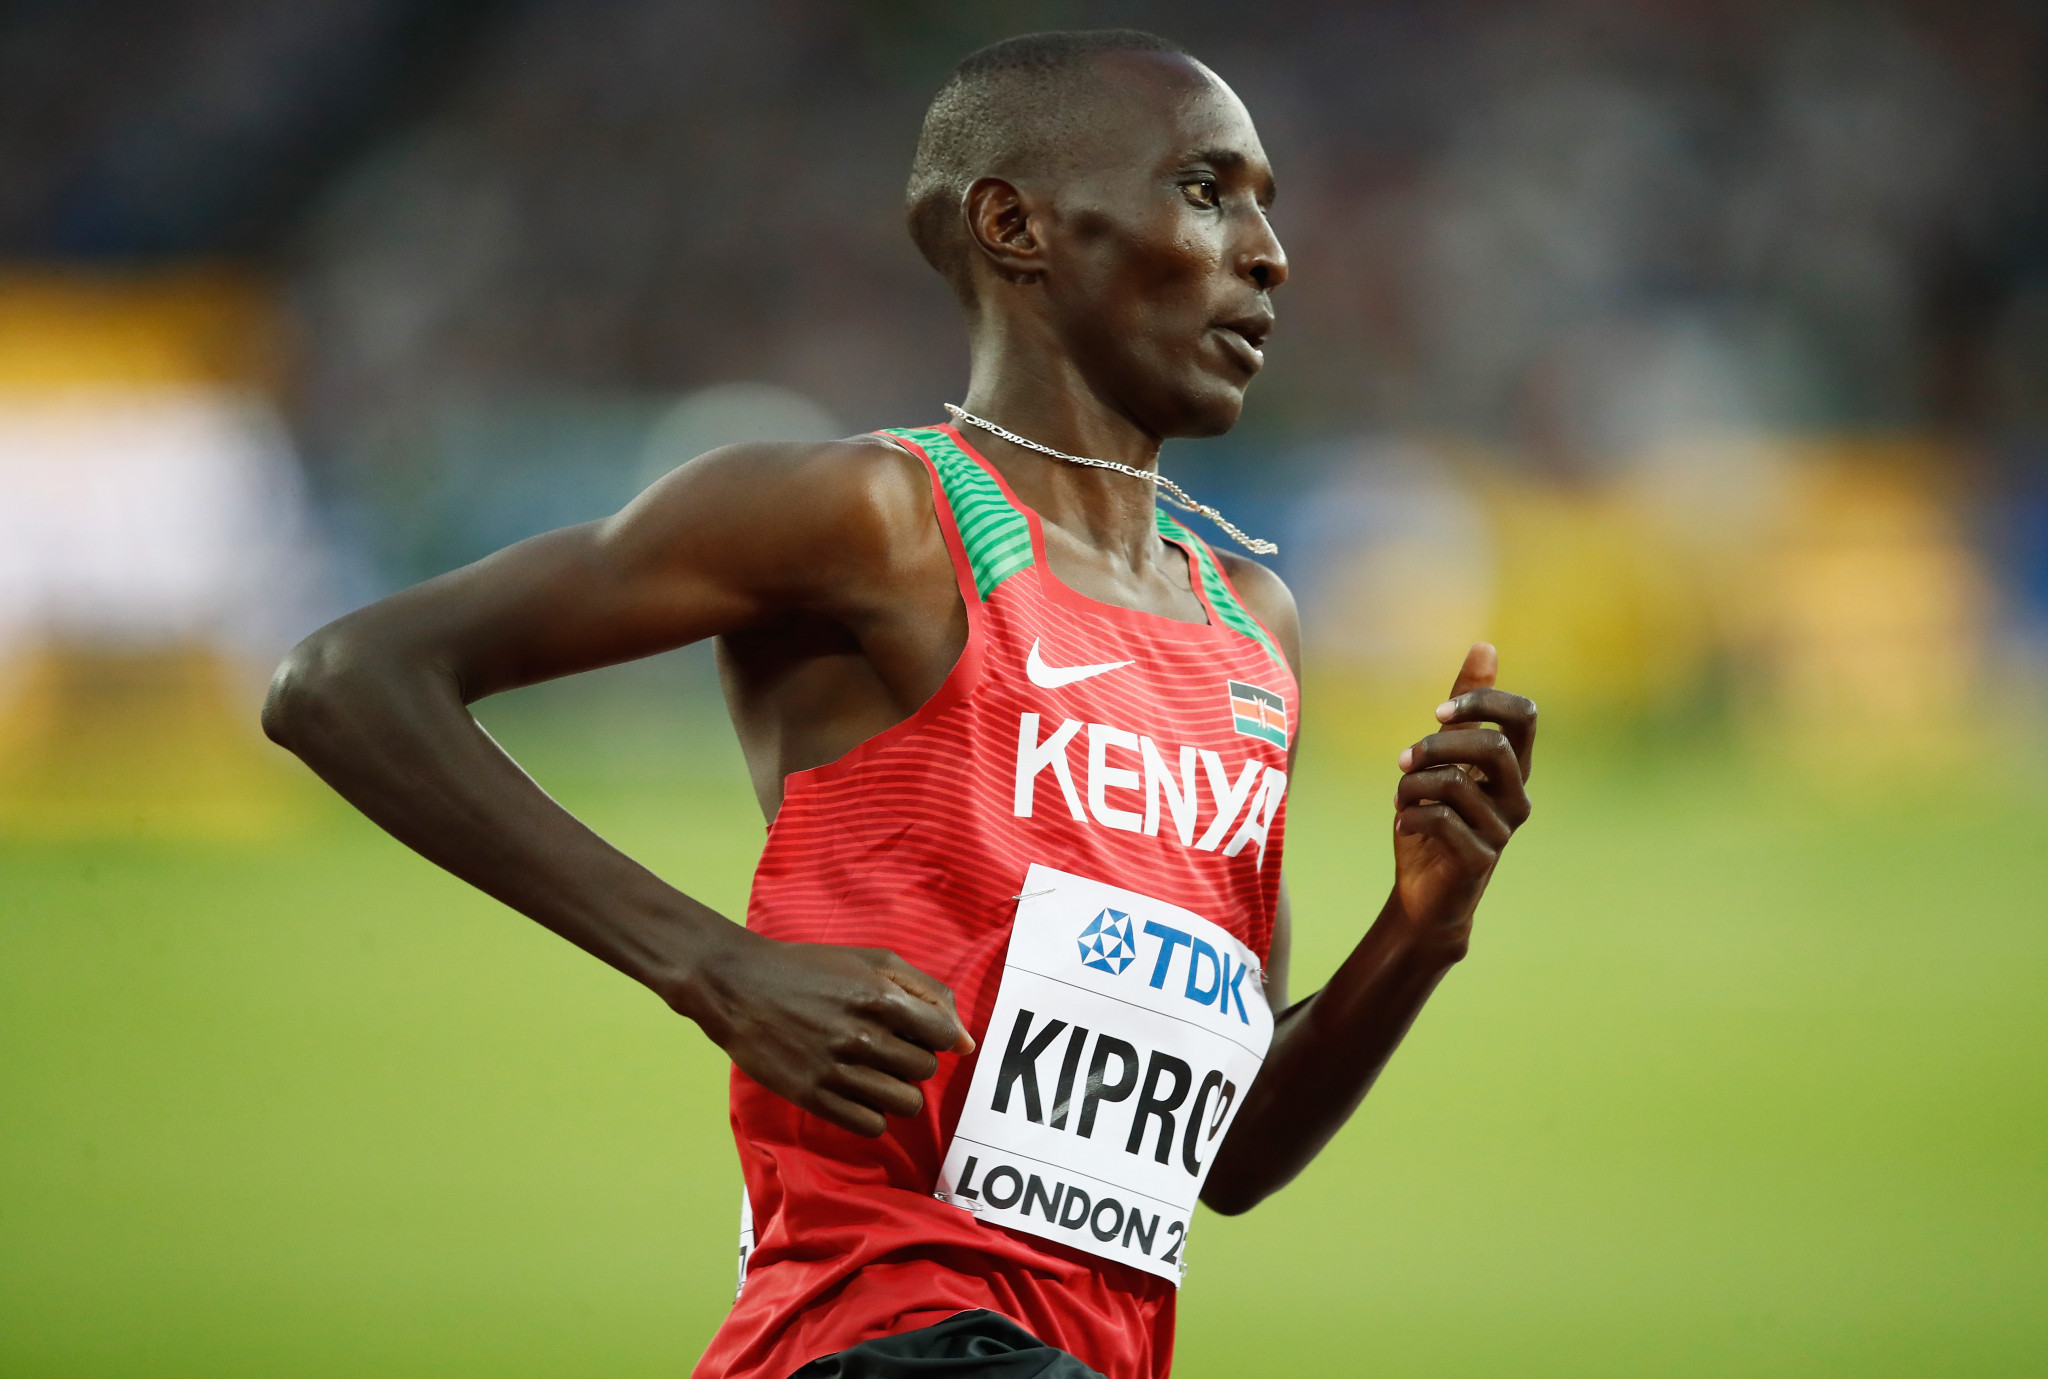 Asbel Kiprop has been banned for four years by the IAAF Disciplinary Tribunal ©Getty Images